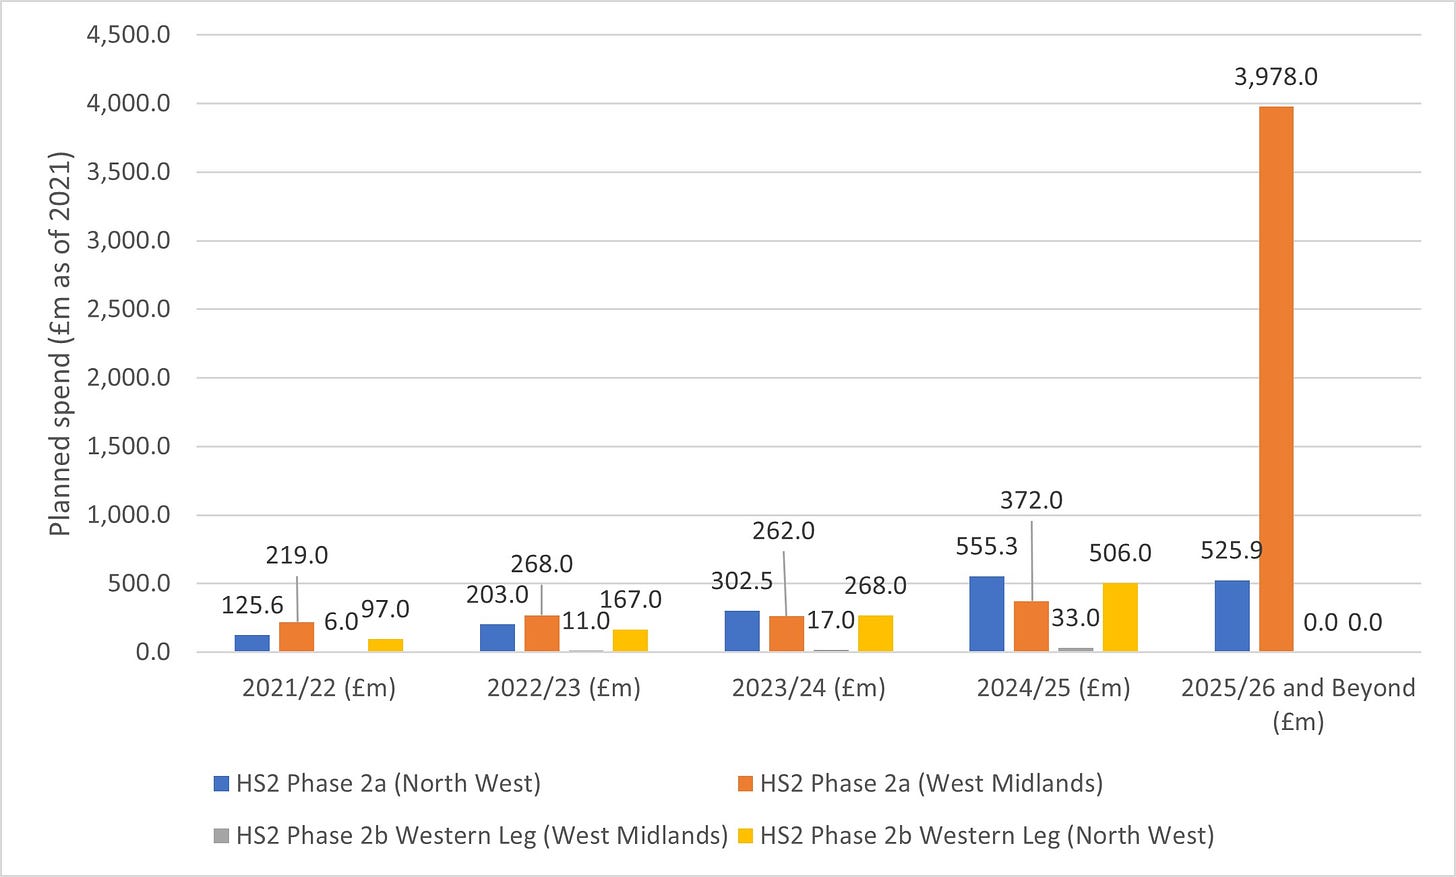 planned spend on HS2 Phase 2 by year and by region from 2021/22 onwards